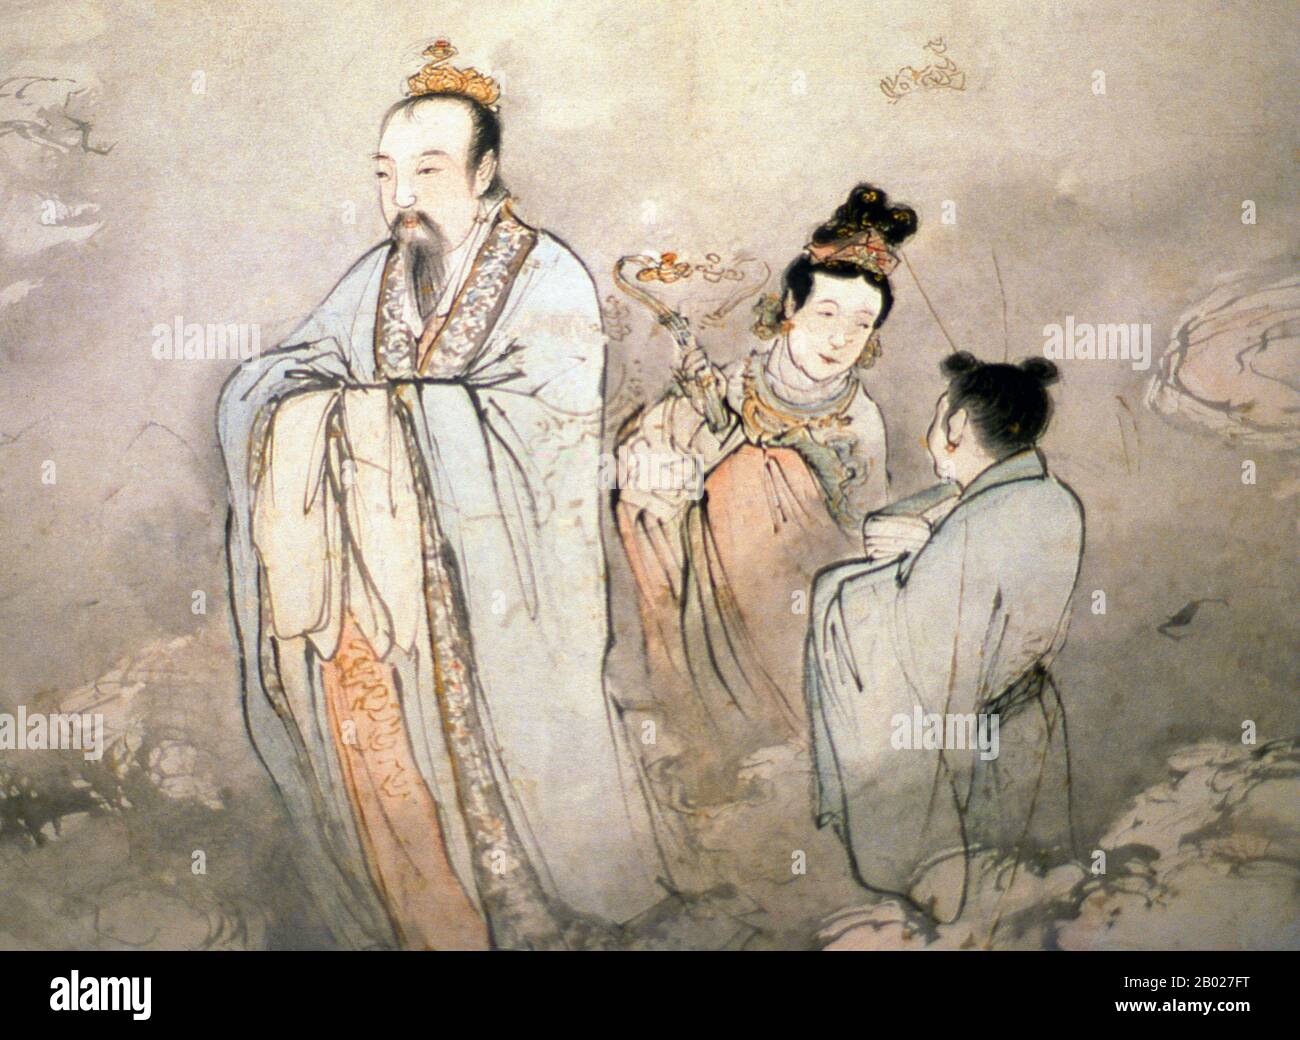 A hanging scroll (Chinese: 立軸; pinyin: lìzhóu; also called 軸 or 掛軸) is one of the many traditional ways to display and exhibit Chinese painting and calligraphy. Displaying the art in such a way was befitting for public appreciation and appraisal of the aesthetics of the scroll in its entirety by the audience. The traditional craft involved in creating such a work is considered an art in itself. Mountings can be divided into a few sections, such as handscrolls, hanging scrolls, album leaves, and screens amongst others. Stock Photo